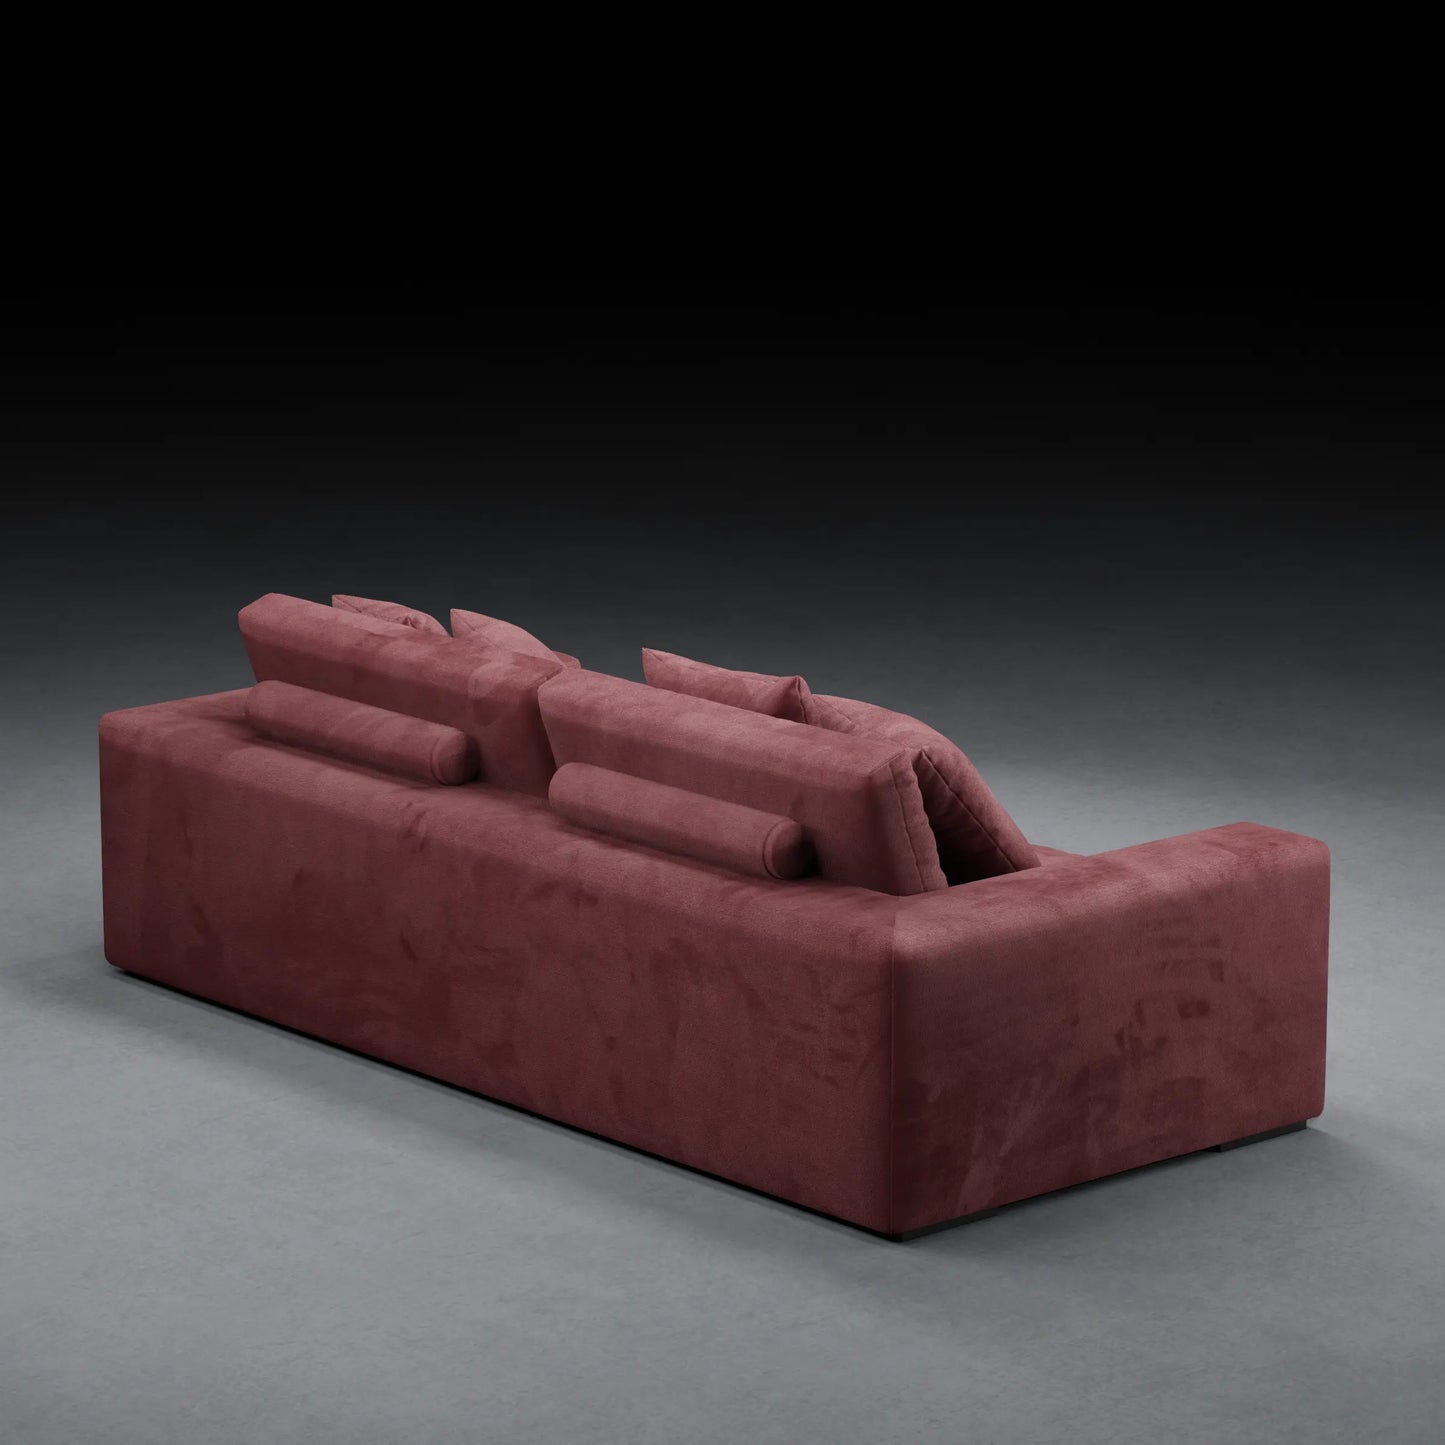 IVY - XL 2 Seater Couch in Velvet Finish | Maroon Color